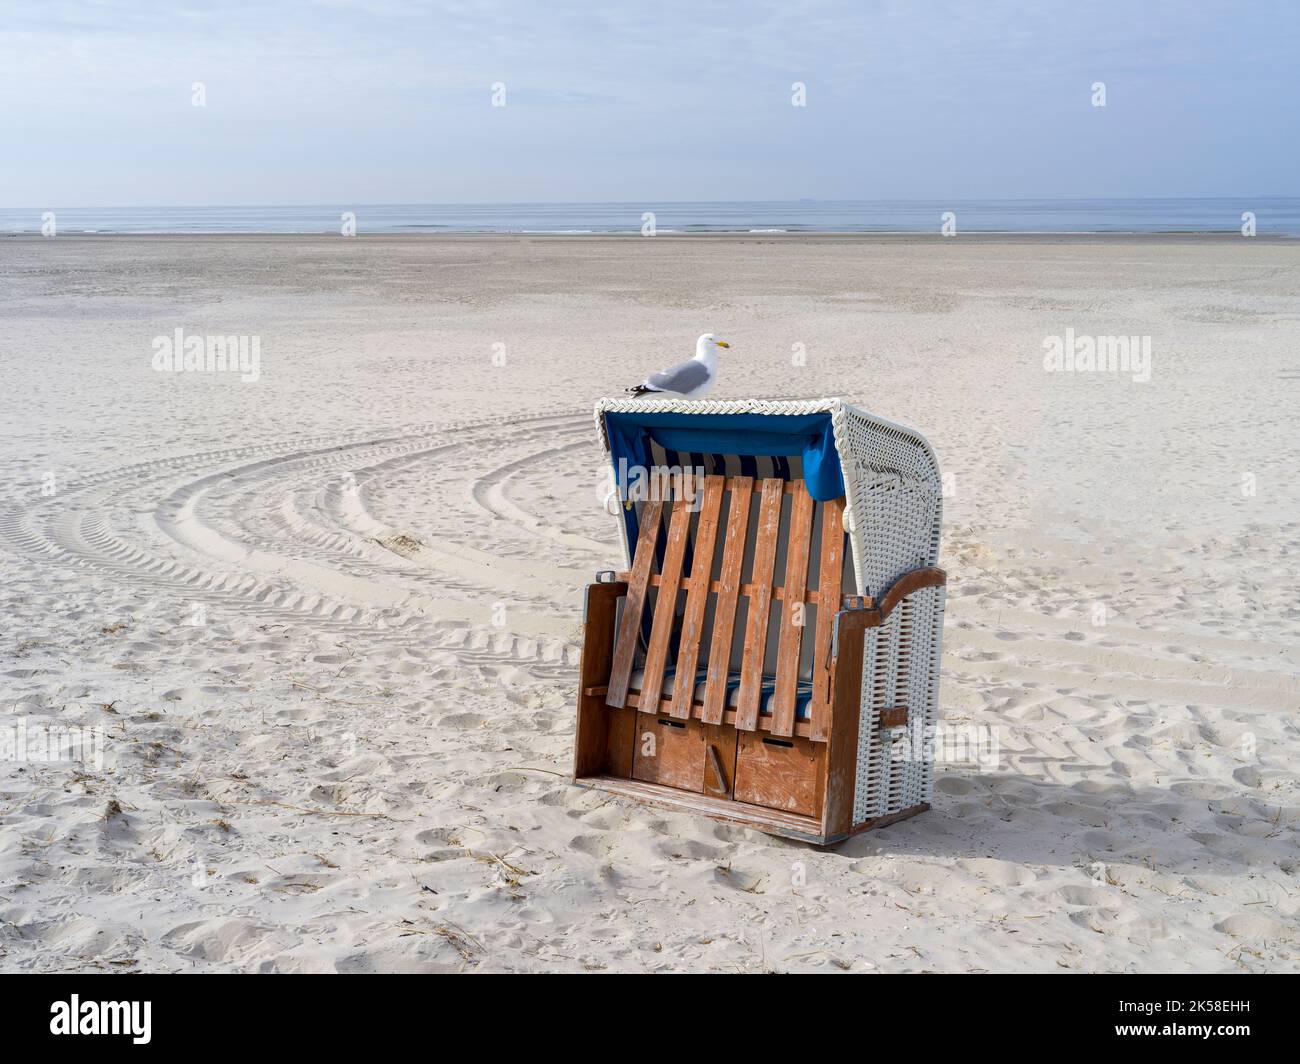 Hooded beach chairs on the island of Juist, Germany Stock Photo